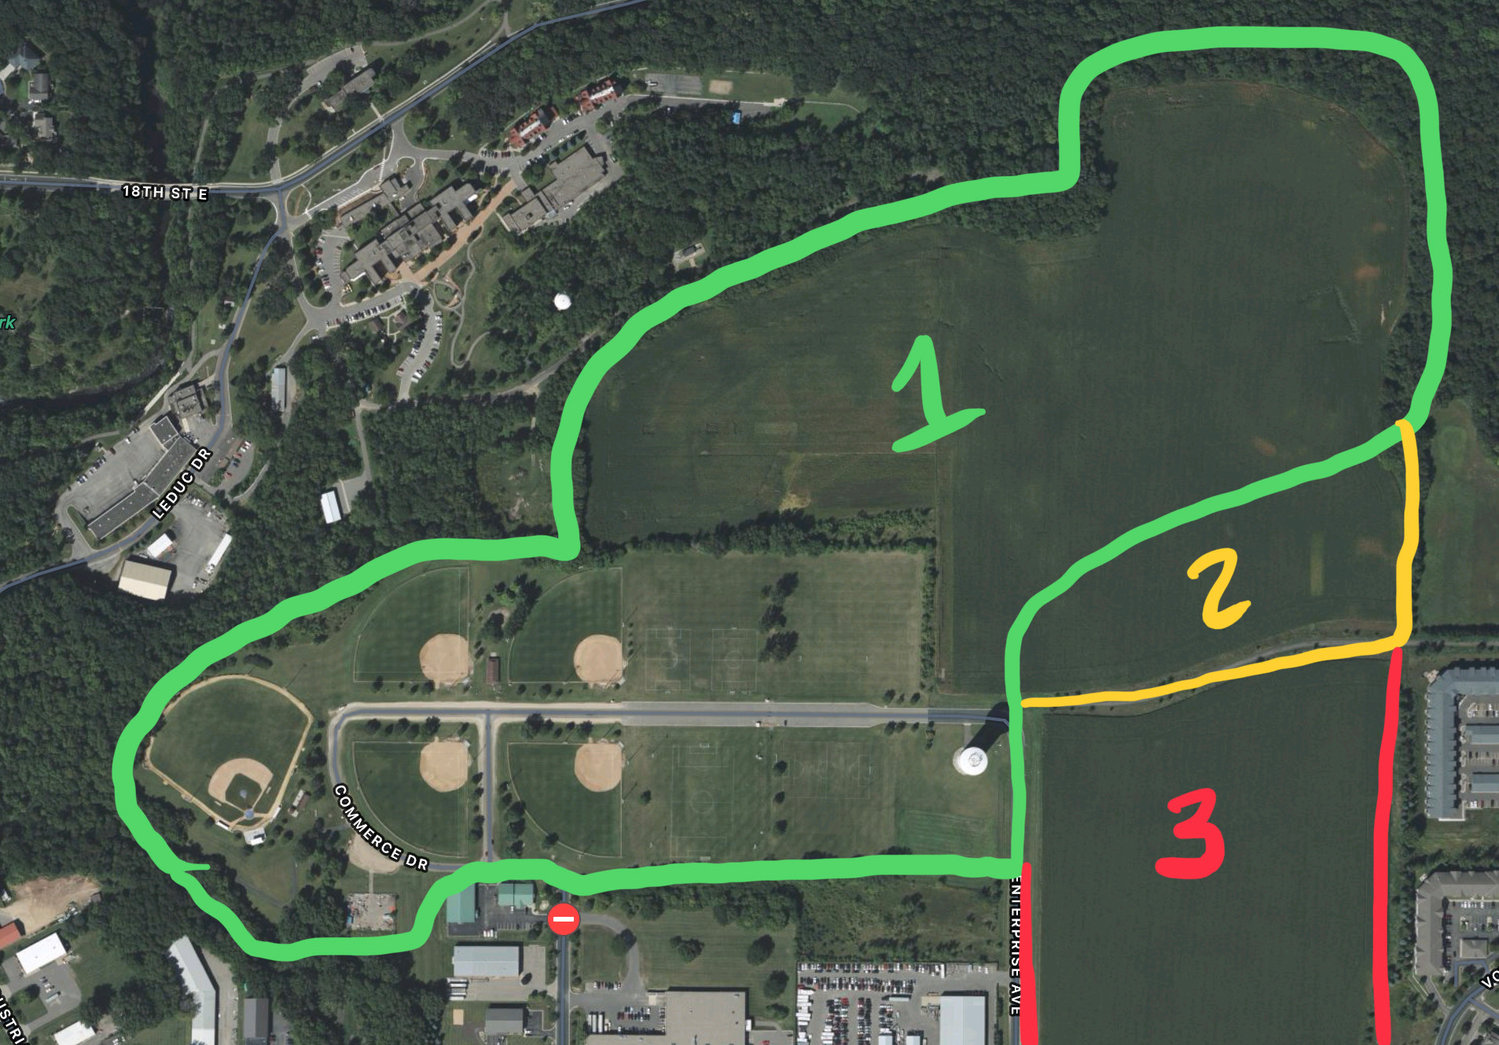 The graphic roughly shows three areas. Area 1 is the current space owned by the City of Hastings and zoned as park space. Area 2 was recently rezoned from park space to Commercial / Industrial but that can be zoned back to park space. Area 3 is currently owned by HEDRA and is not currently available as park space.